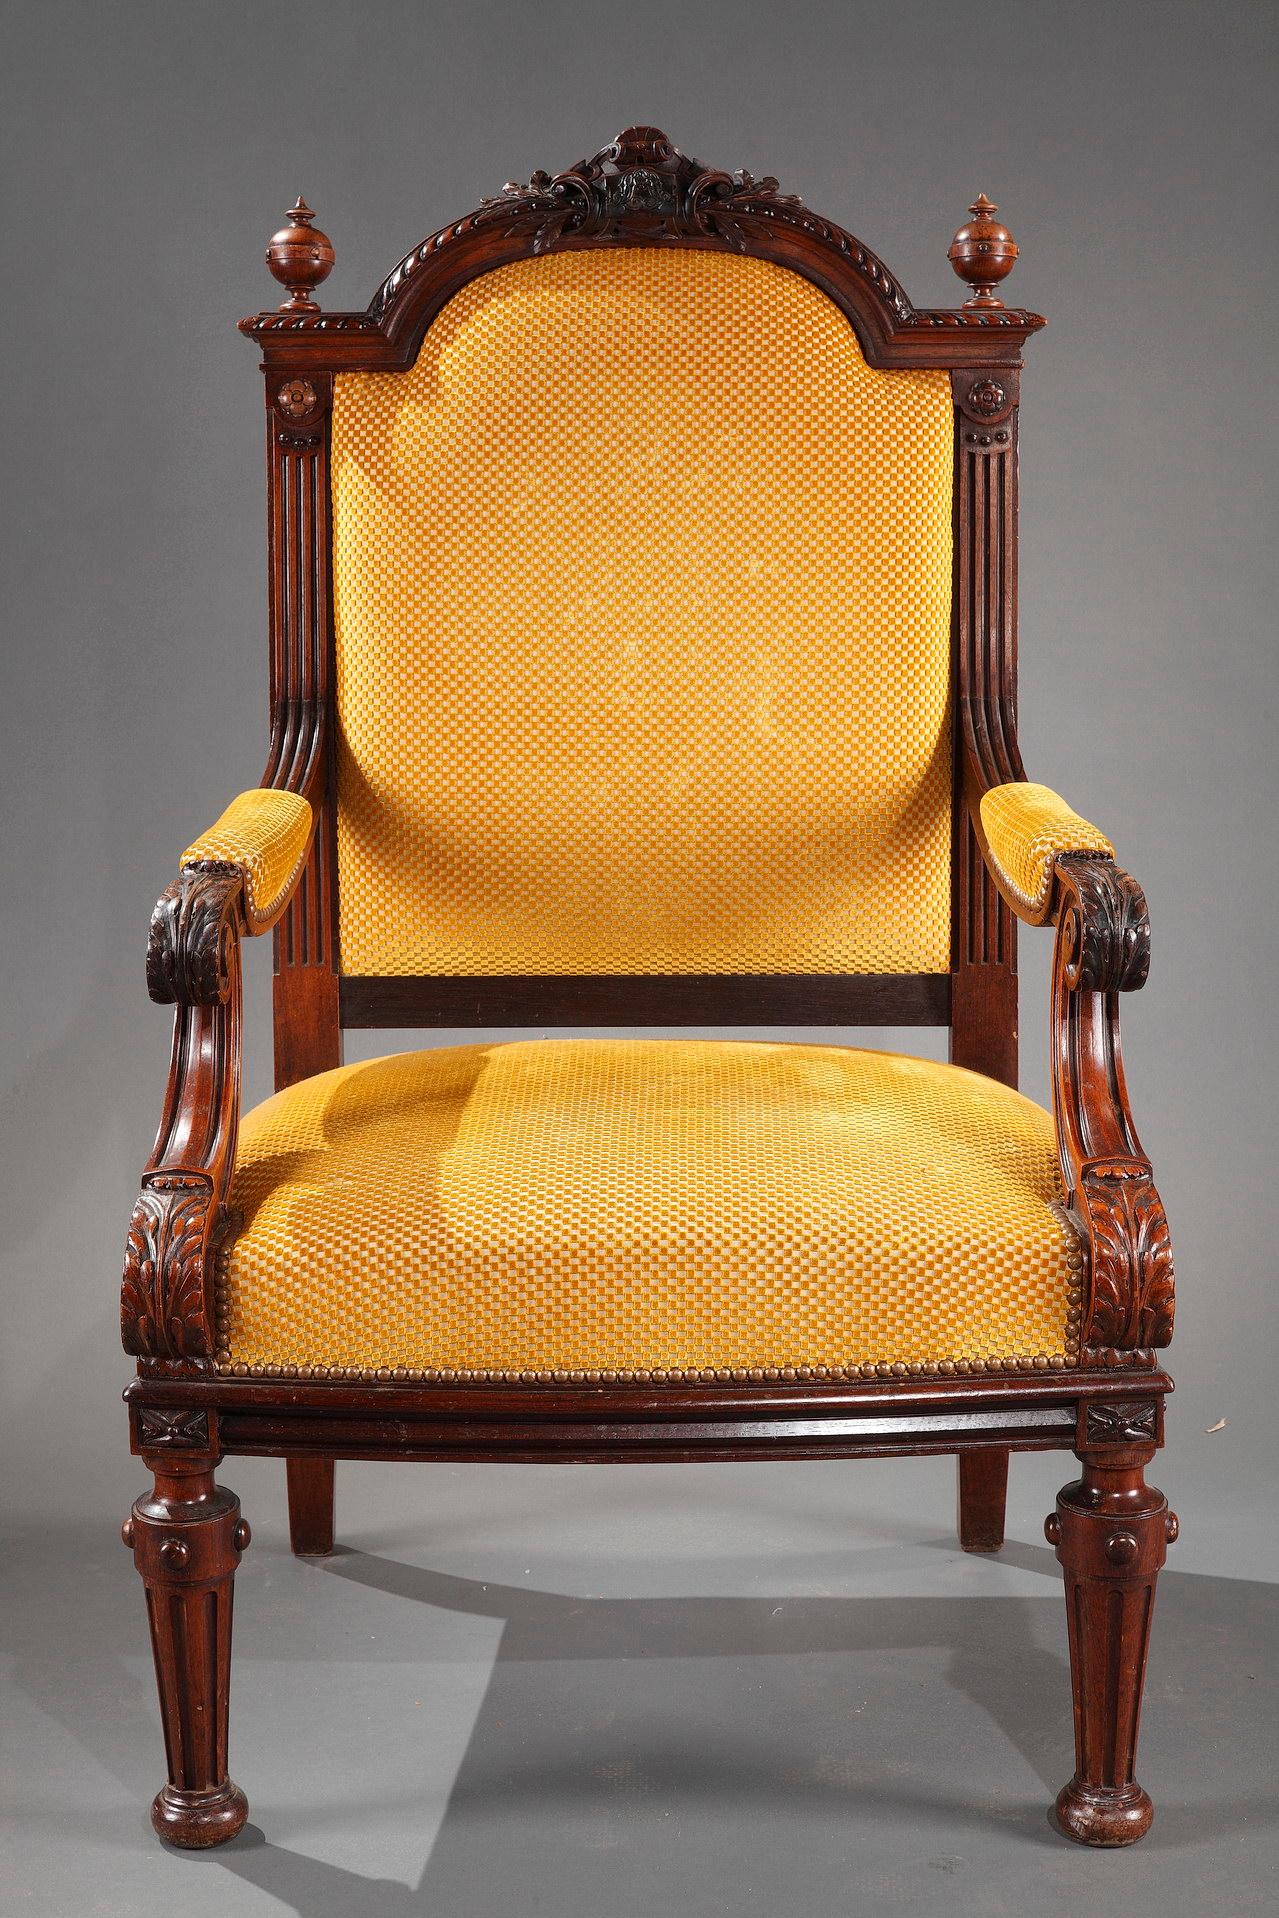 Important pair of armchairs attributed to H.A. Fourdinois, with a flat back in “chapeau de gendarme” centered with a carved and foliated cartouche, joining padded scroll armrests carved with acanthus leaves. Standing on two characteristic